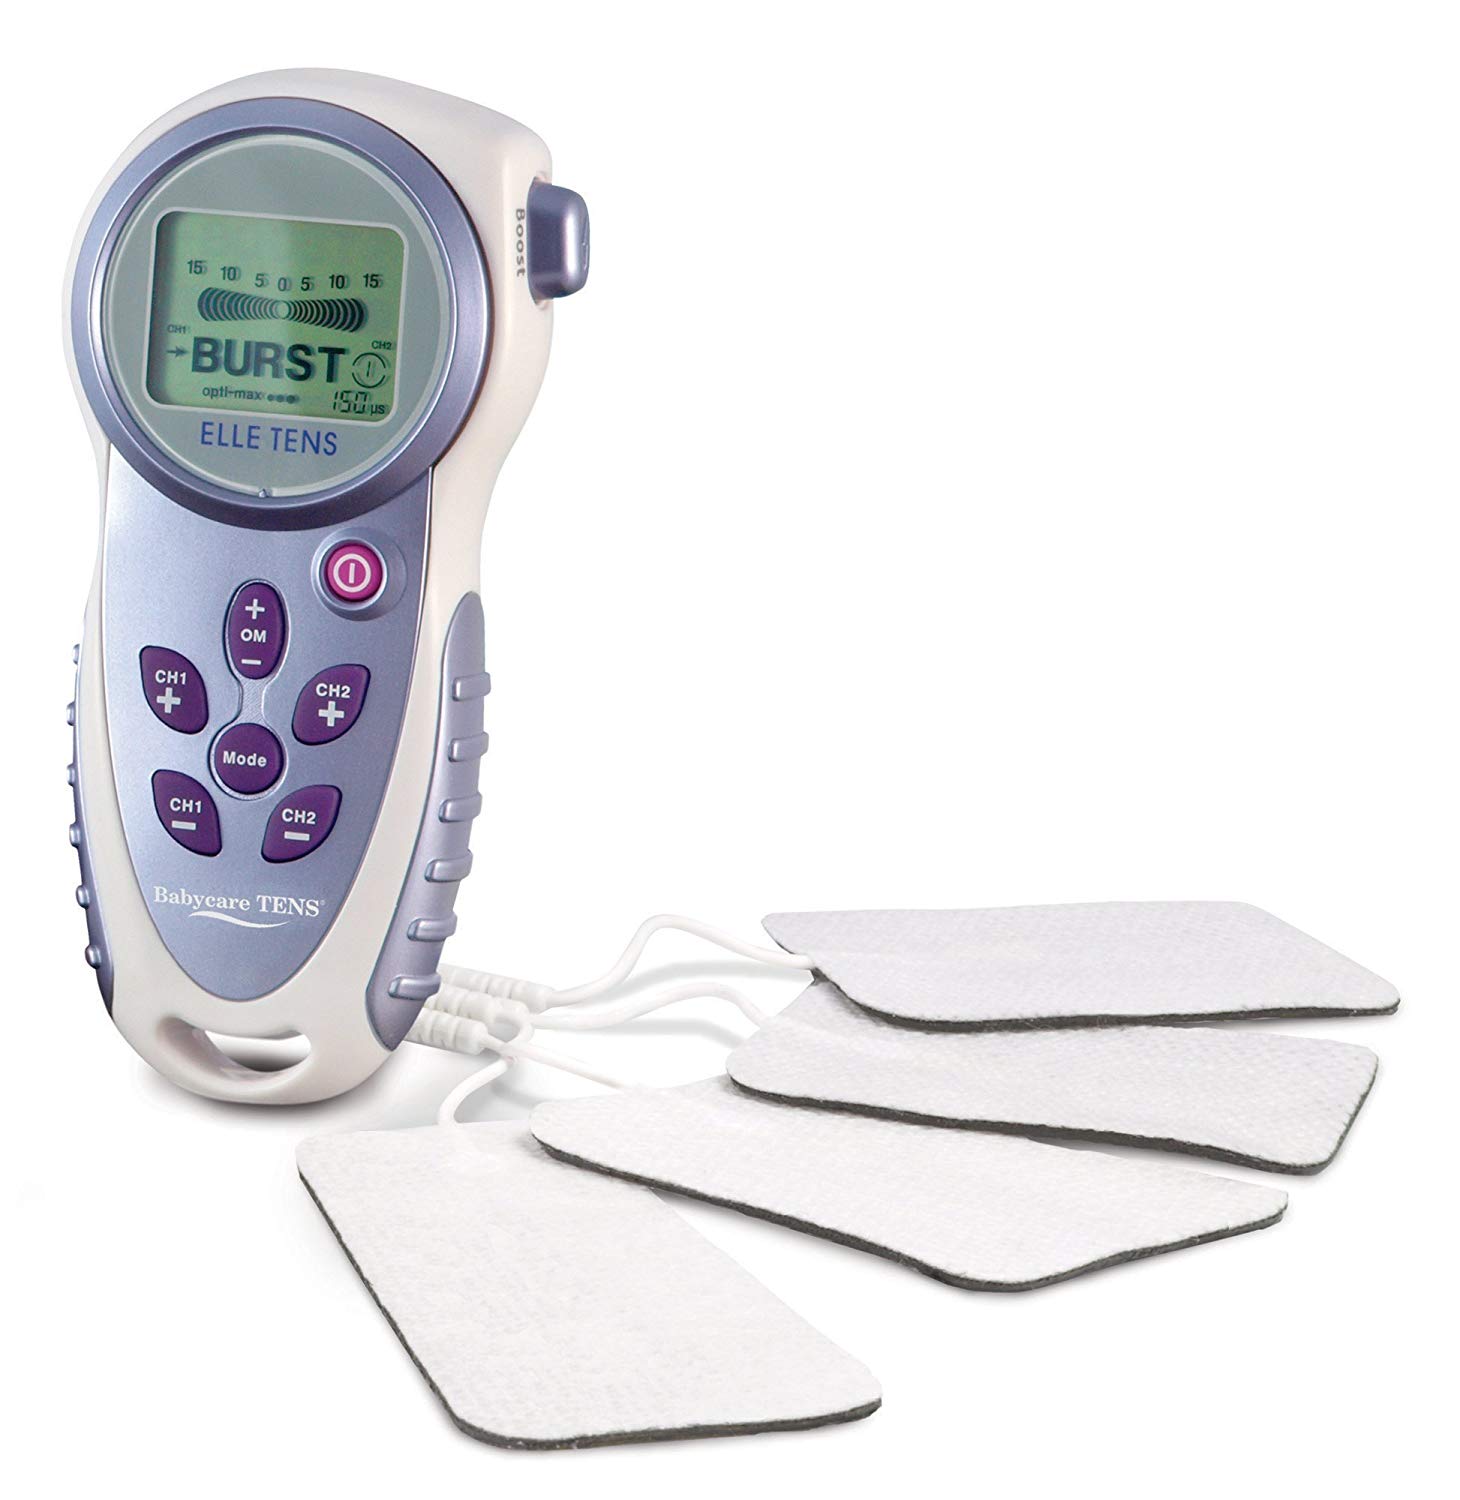 TENS Unit for Restless Legs: Benefits and Risks